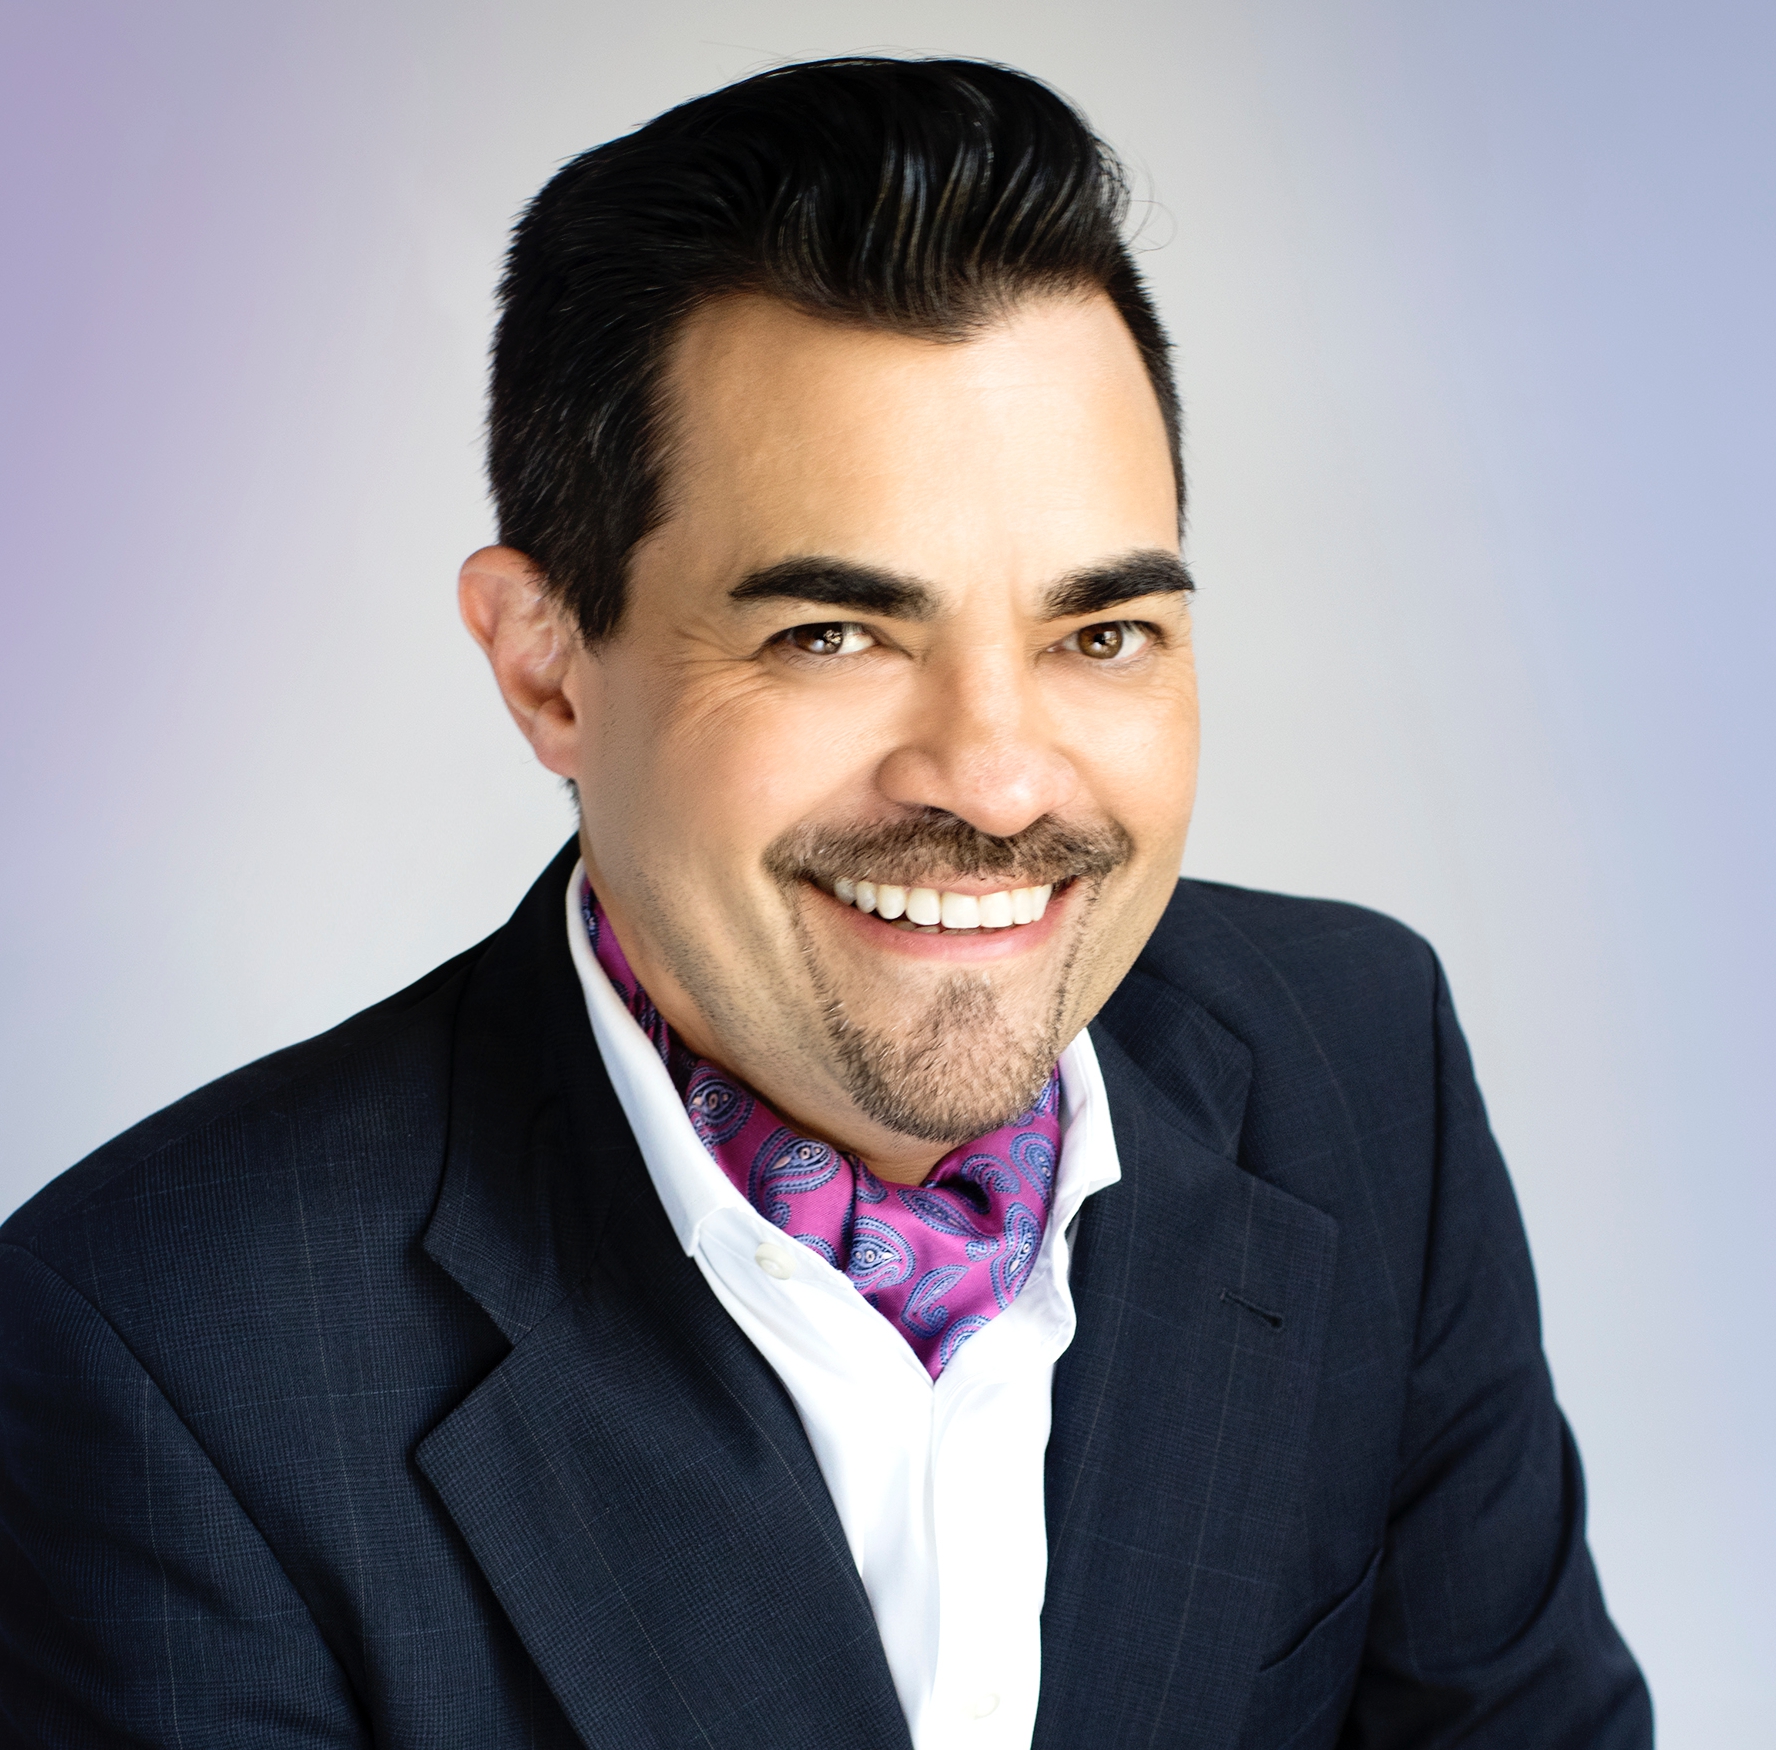 A person with short dark hair and a mustache is smiling at the camera. They are wearing a dark blazer, a white shirt, and a purple patterned scarf that adds a touch of homey elegance. The background is a gradient of light blue and purple.